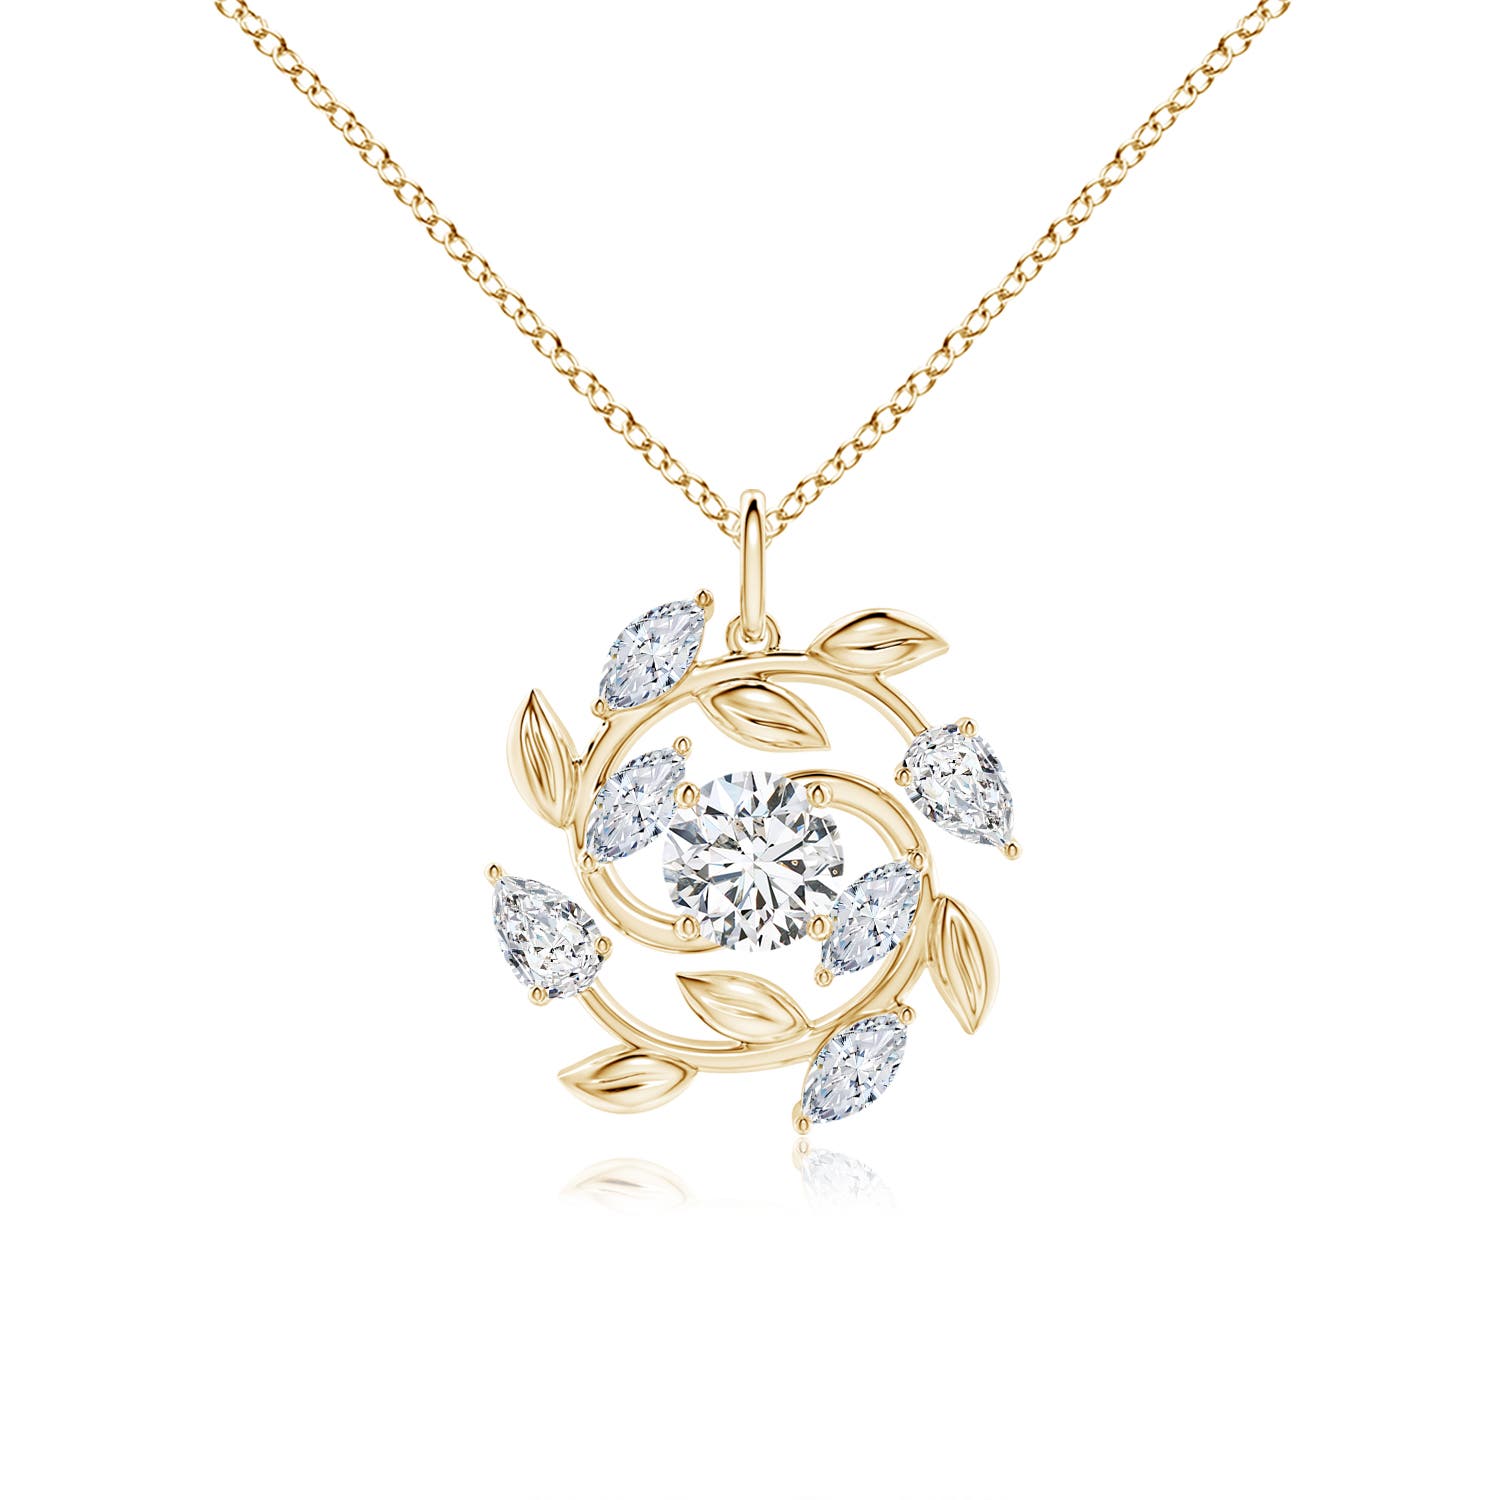 H, SI2 / 1.76 CT / 18 KT Yellow Gold